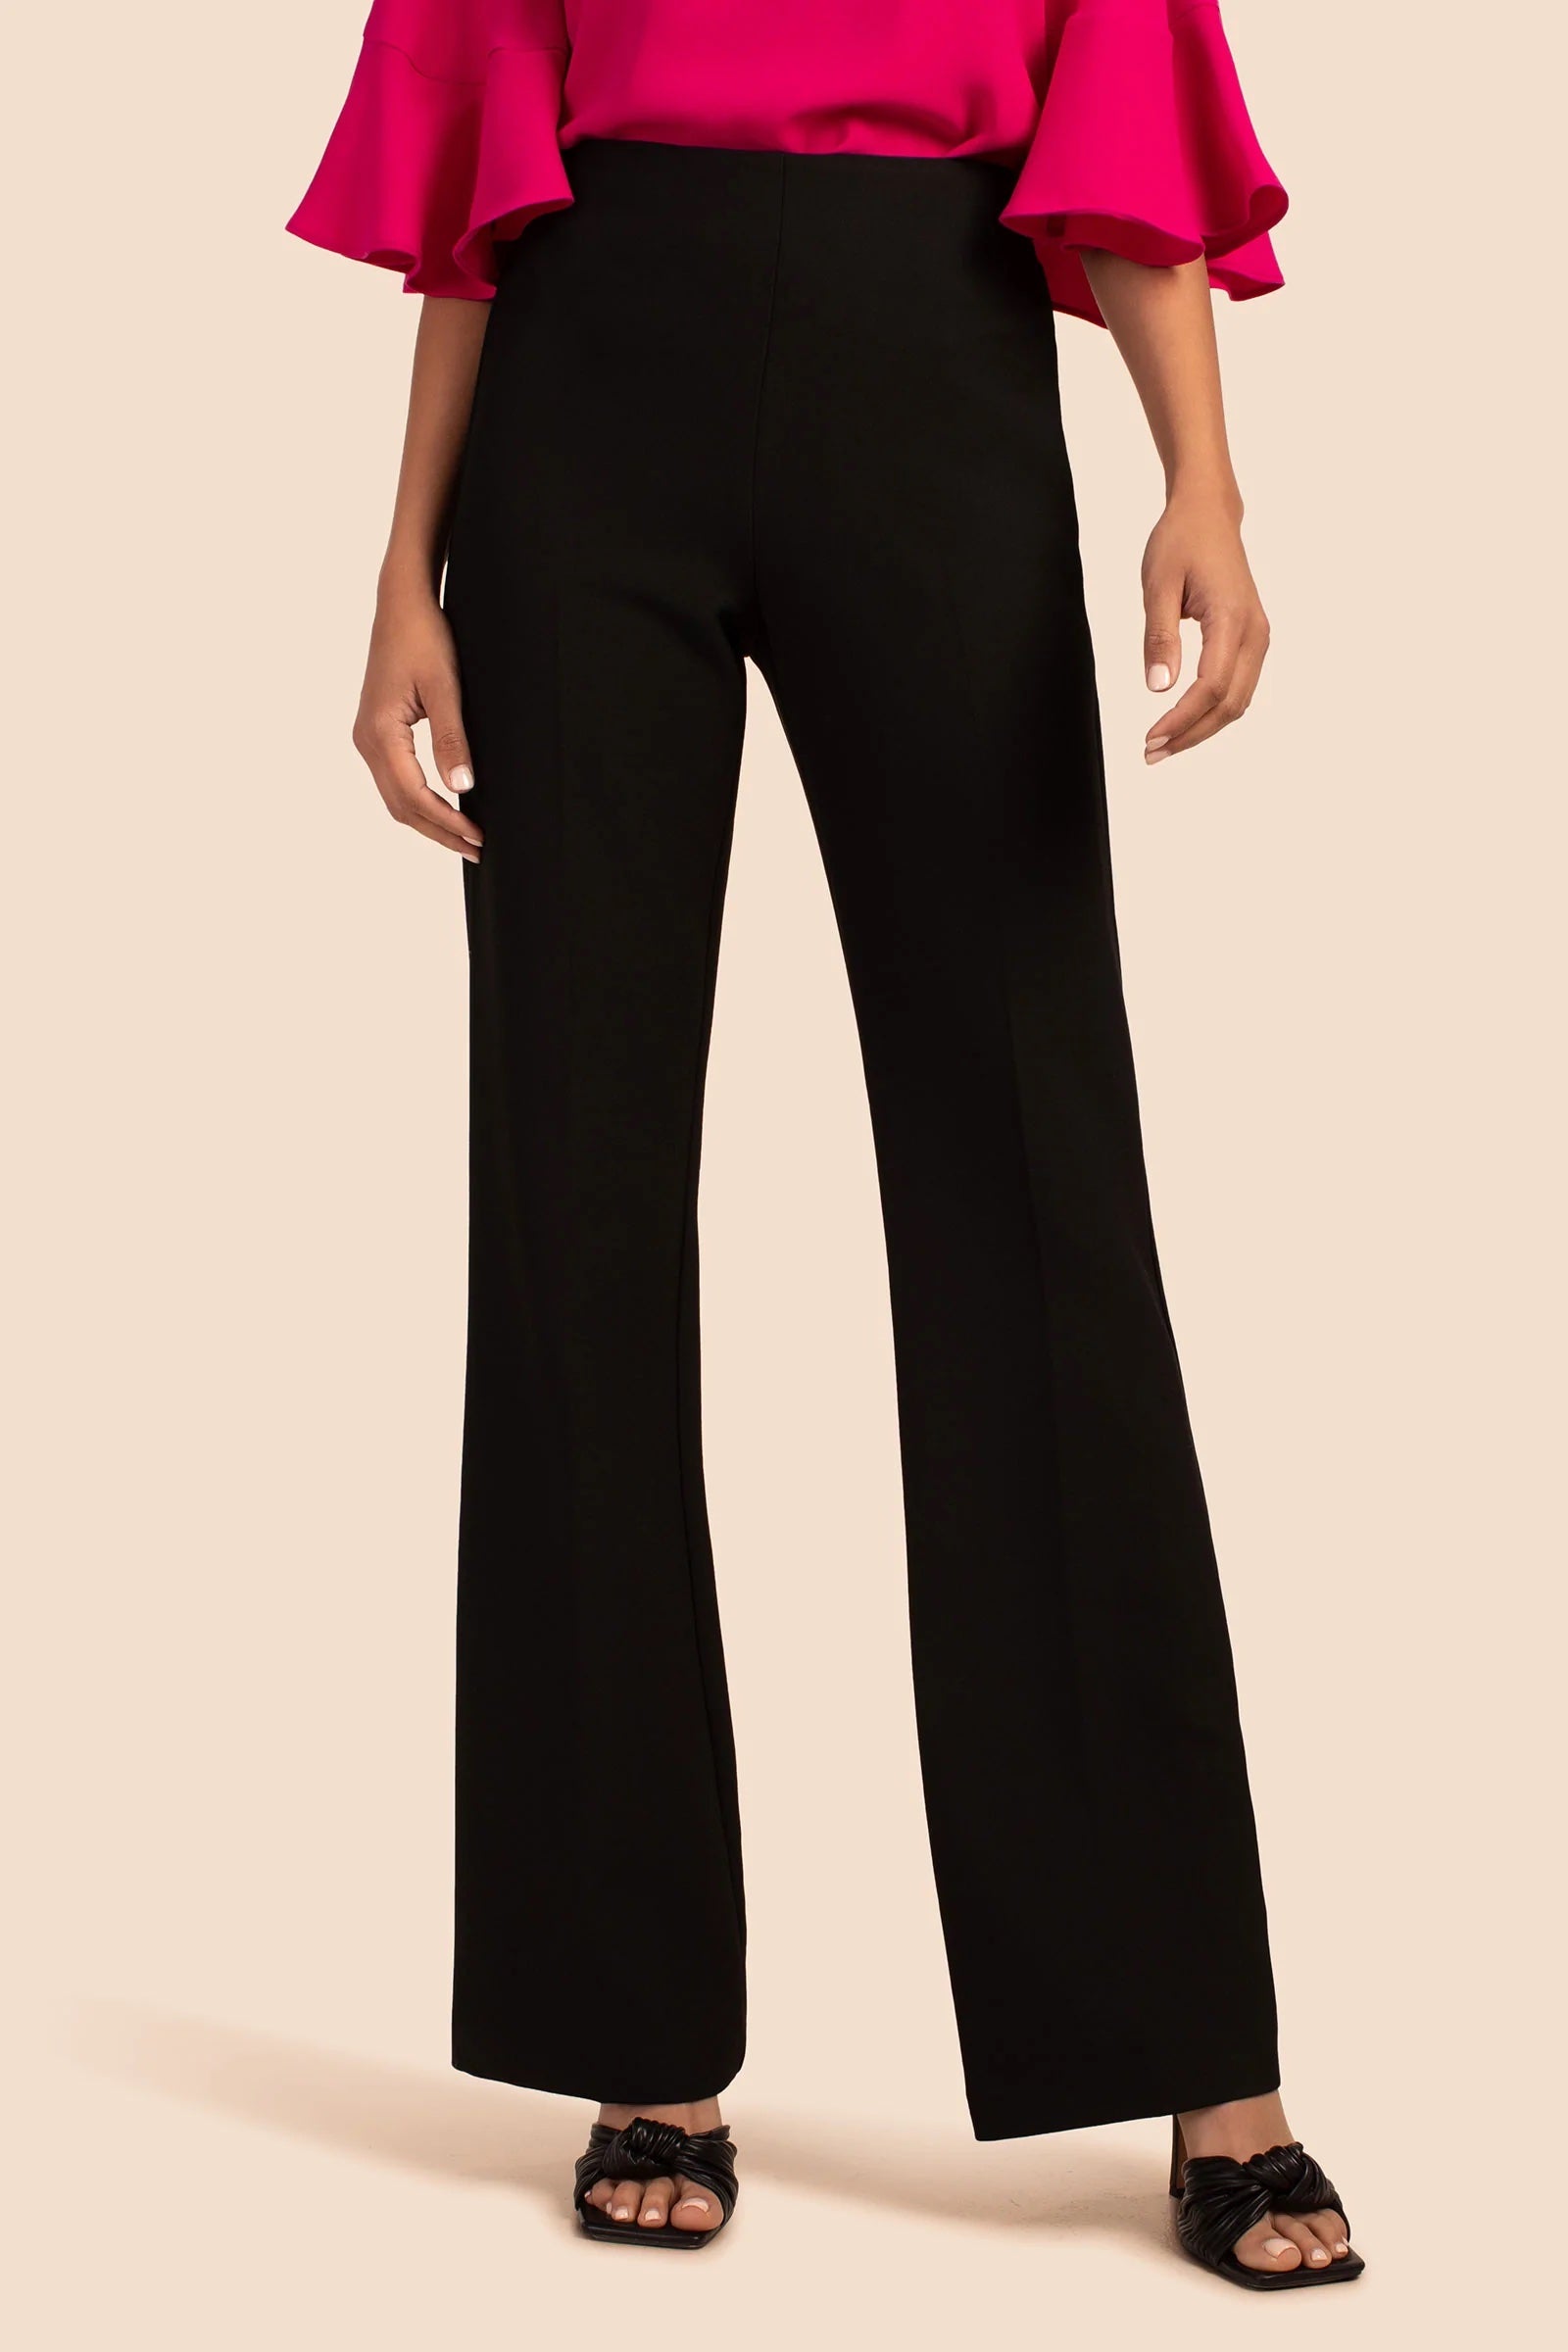 Luxe Drape, this long pant in black